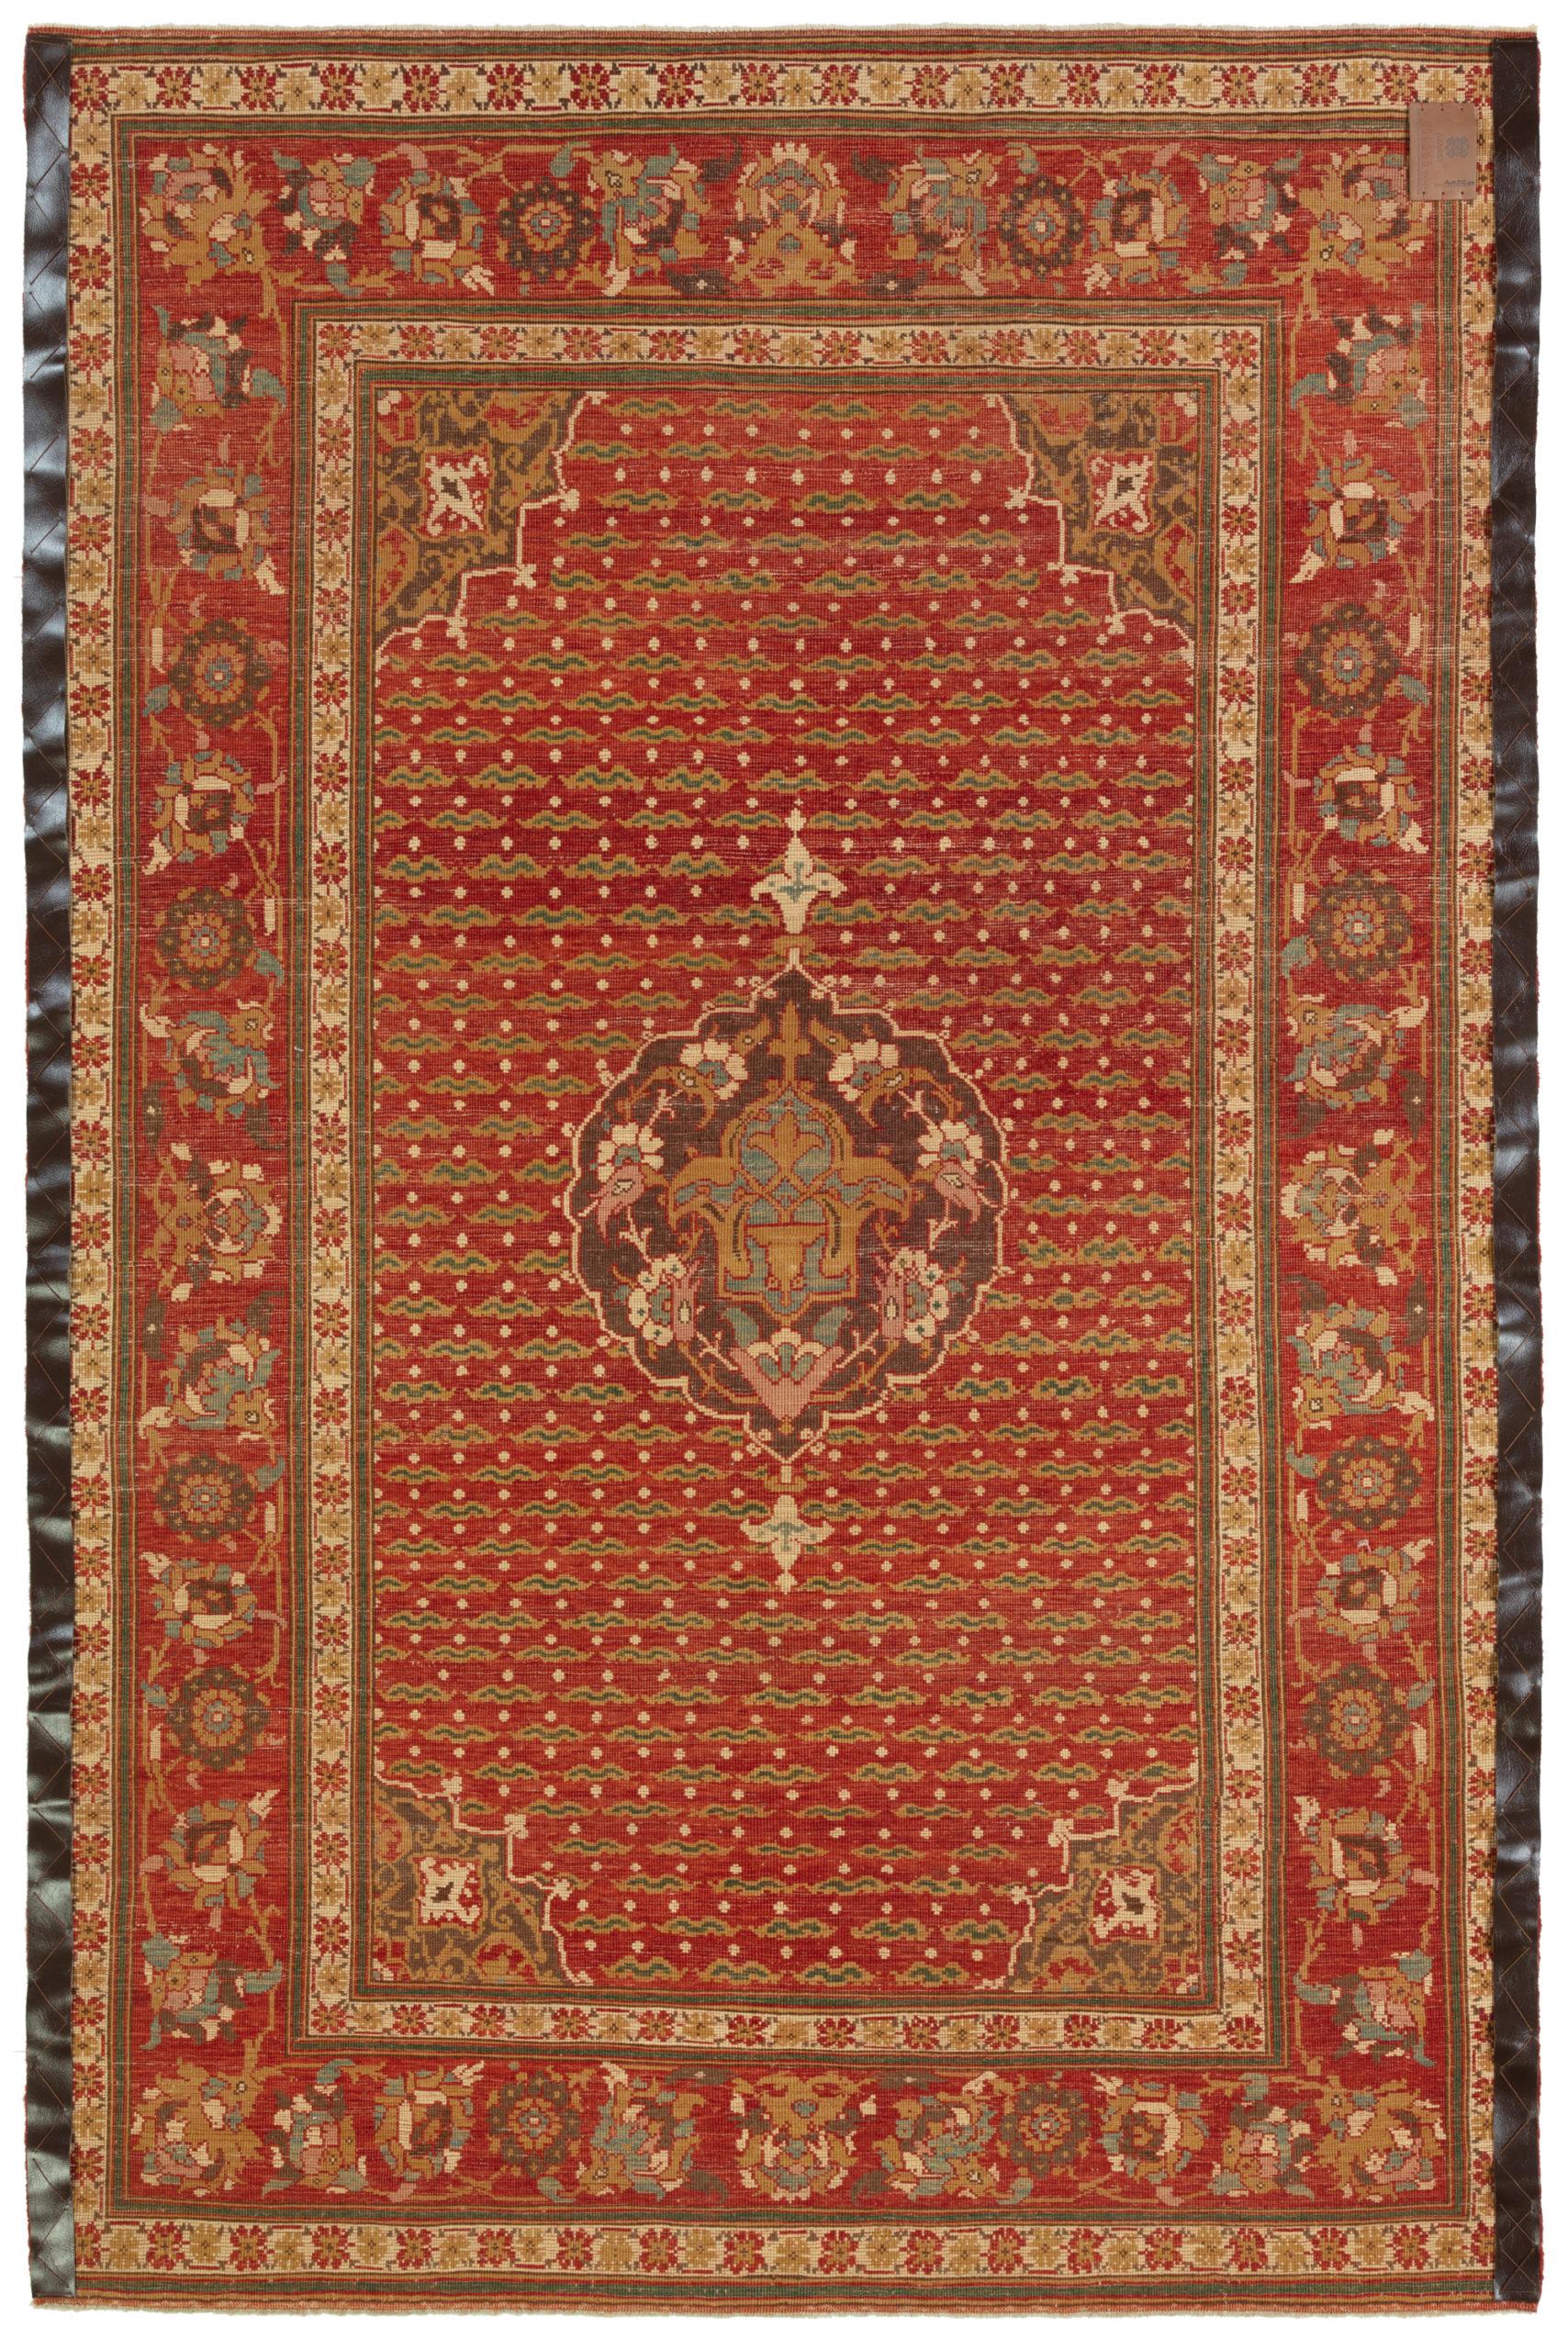 Turkish Court Manufactury Rugs were woven in the Egyptian workshops founded by Ottoman Empire in the 16th century. Those carpets were woven in Egypt, following the paper cartoons probably created in Istanbul and sent to Cairo at that time.
The